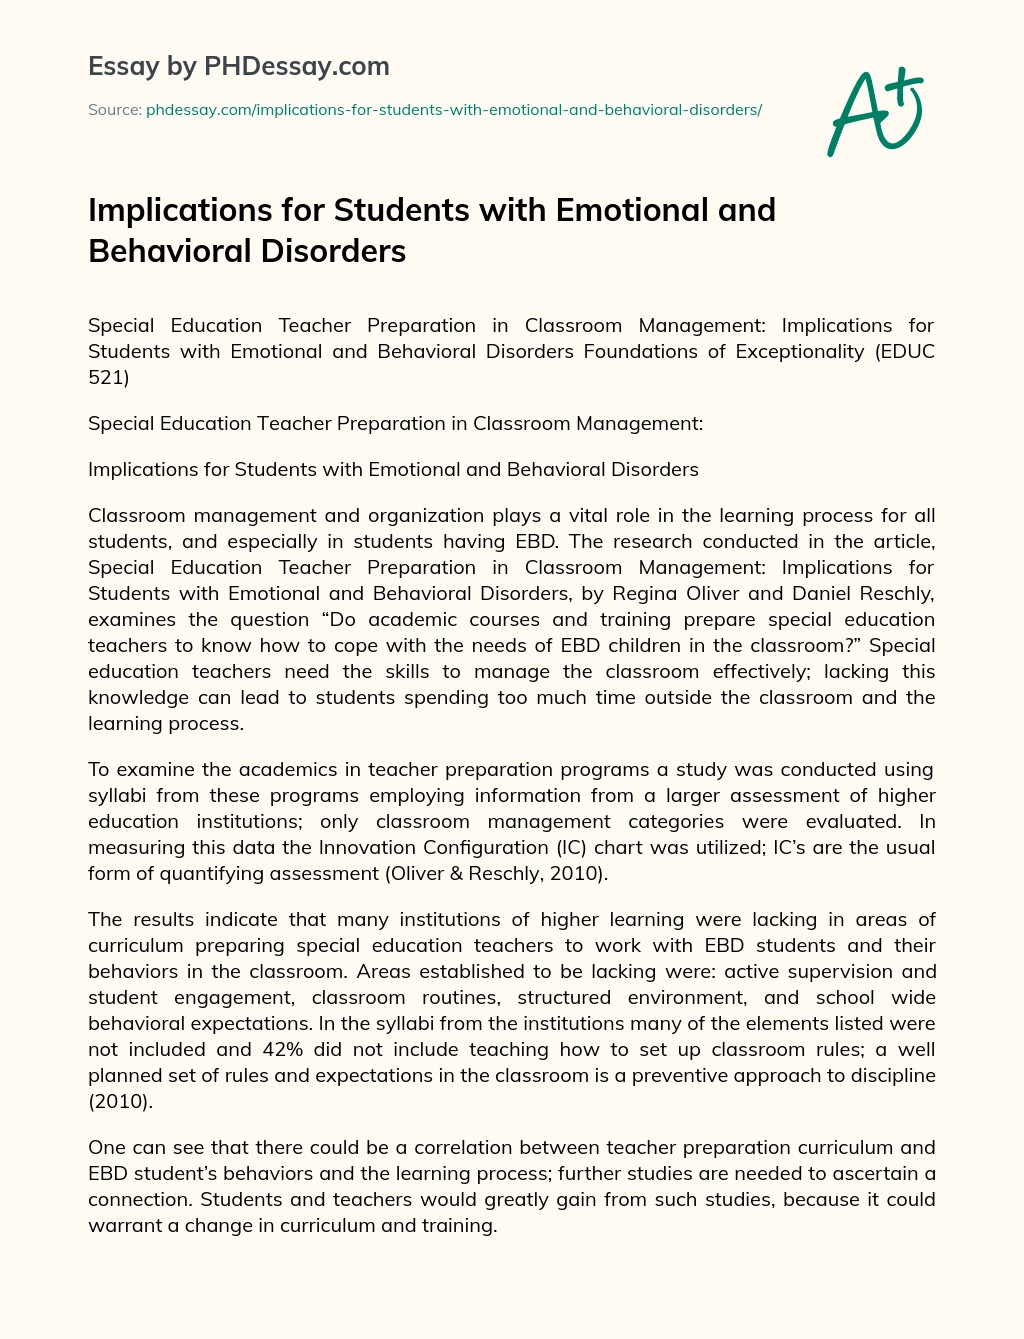 Implications for Students with Emotional and Behavioral Disorders essay